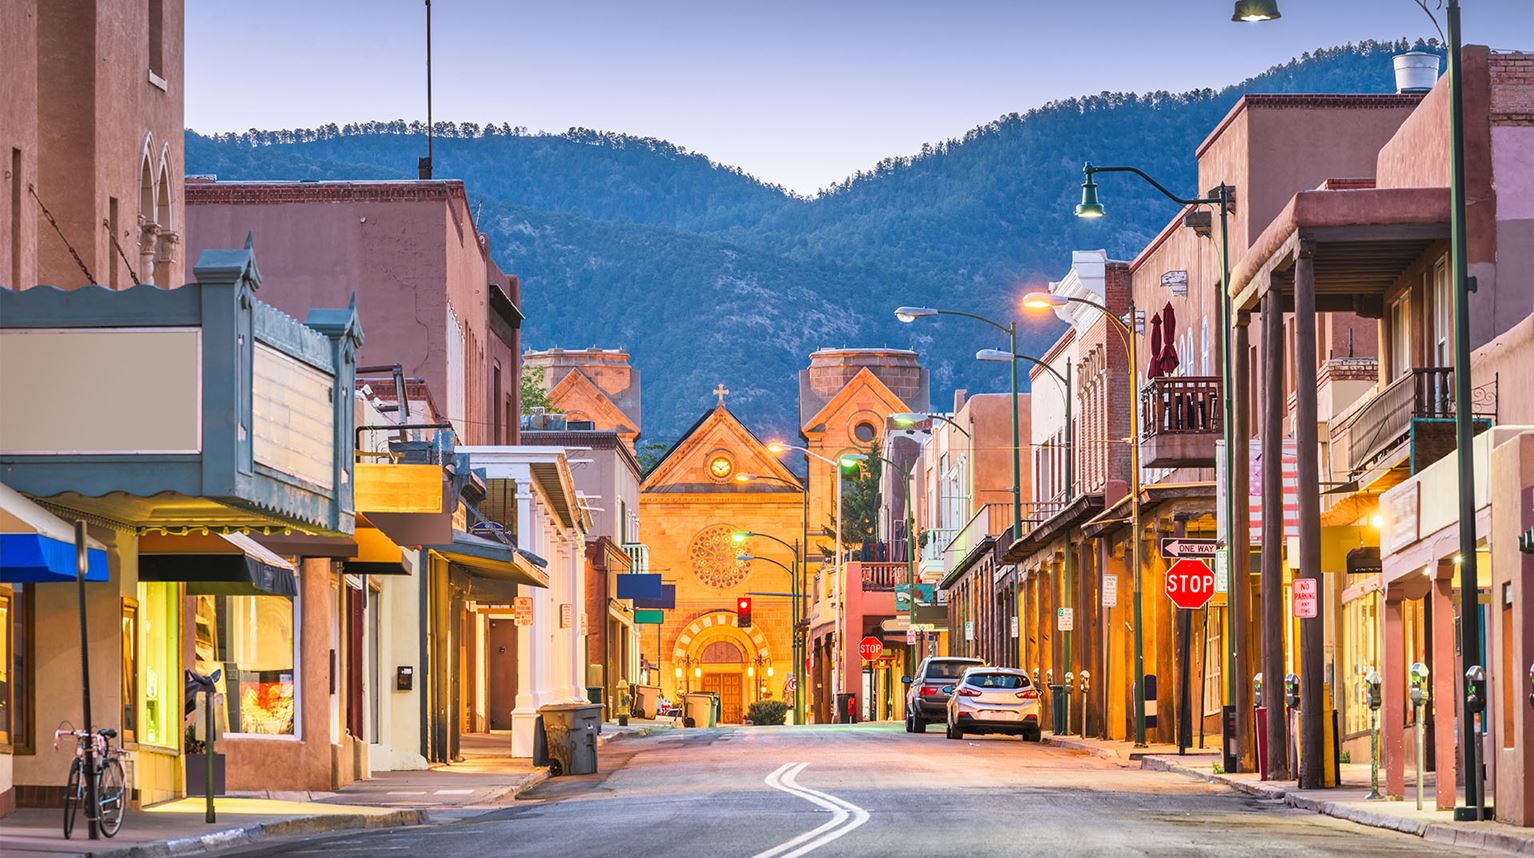 Low rise buildings in Santa Fe, New Mexico